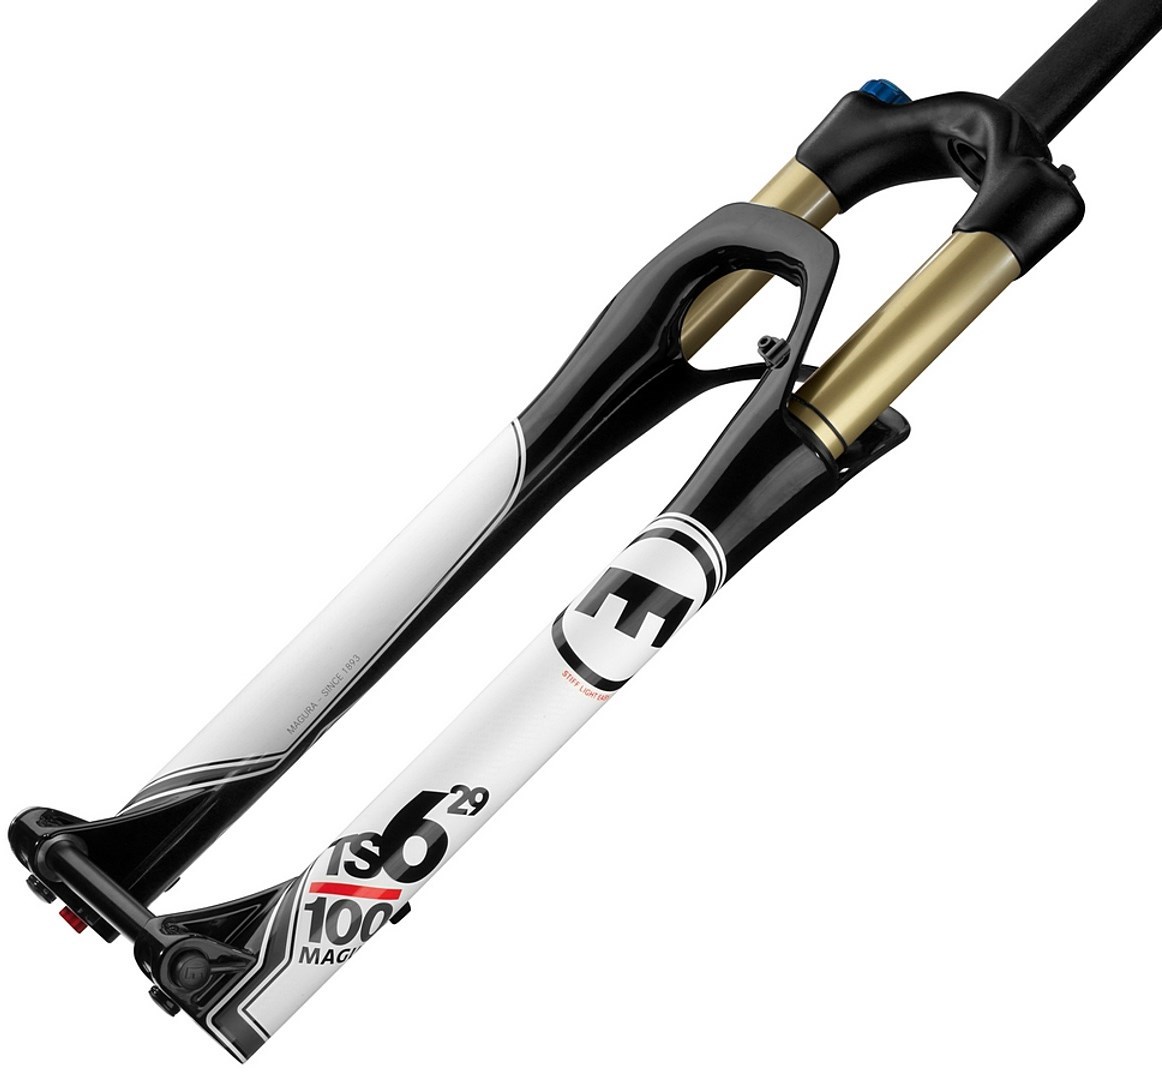 Magura TS6 100 29er 29 inch Suspension Fork 2013 product image